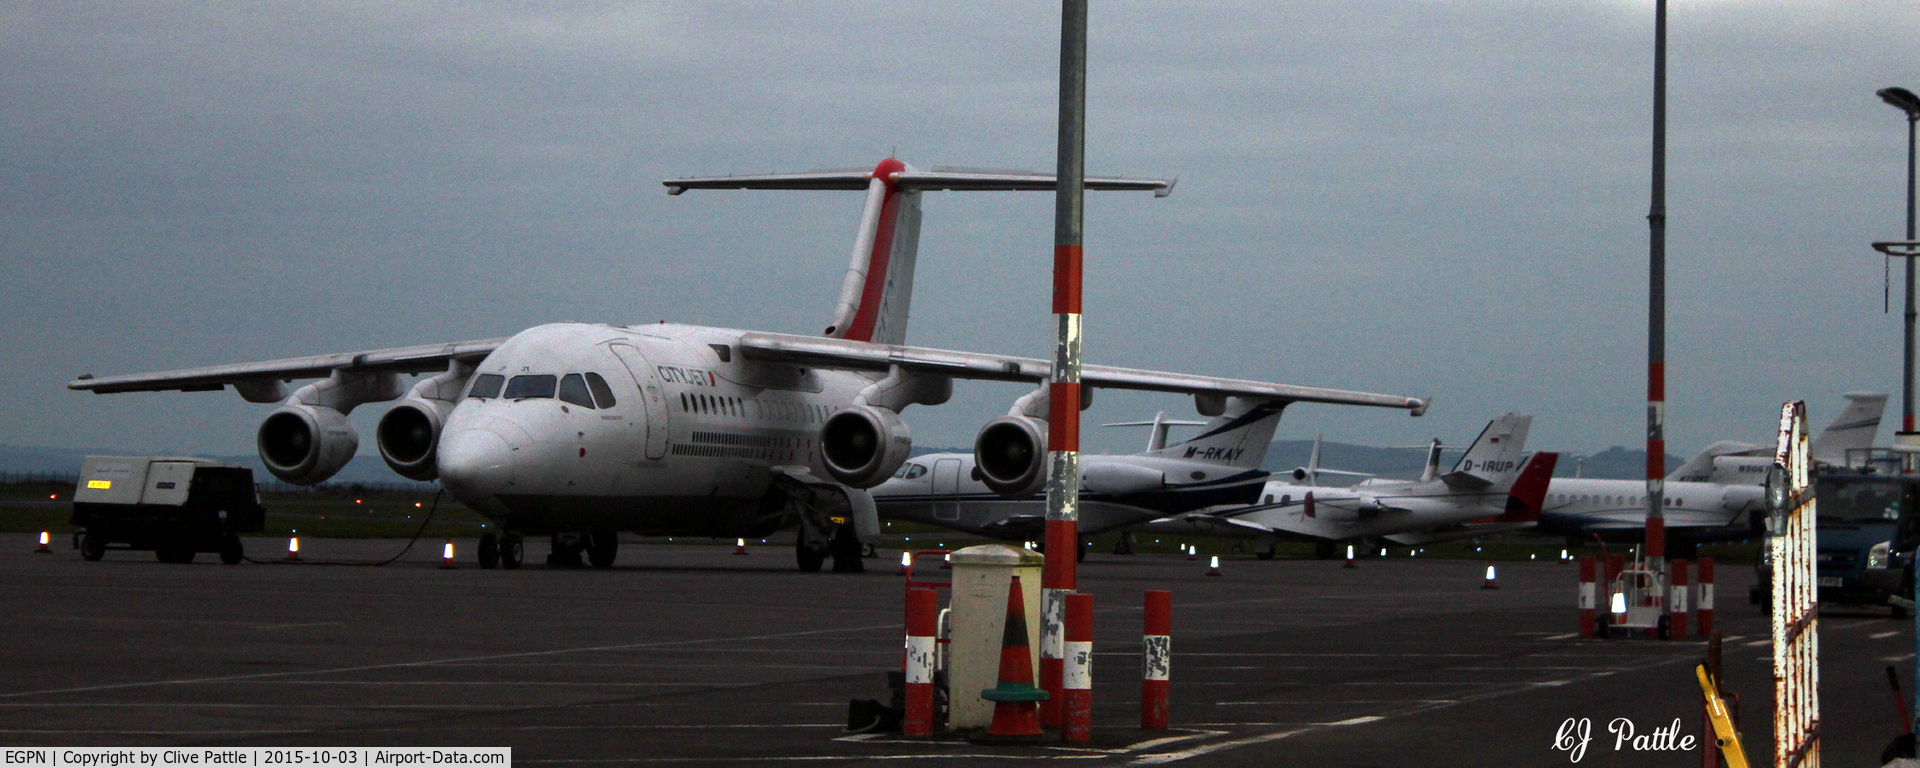 Dundee Airport, Dundee, Scotland United Kingdom (EGPN) - A bizjet busy weekend at Dundee Riverside EGPN - the main apron during the Dunhill Golf Championships at nearby St Andrews. Chartered BAe 146  is Cityjet EI-RJY